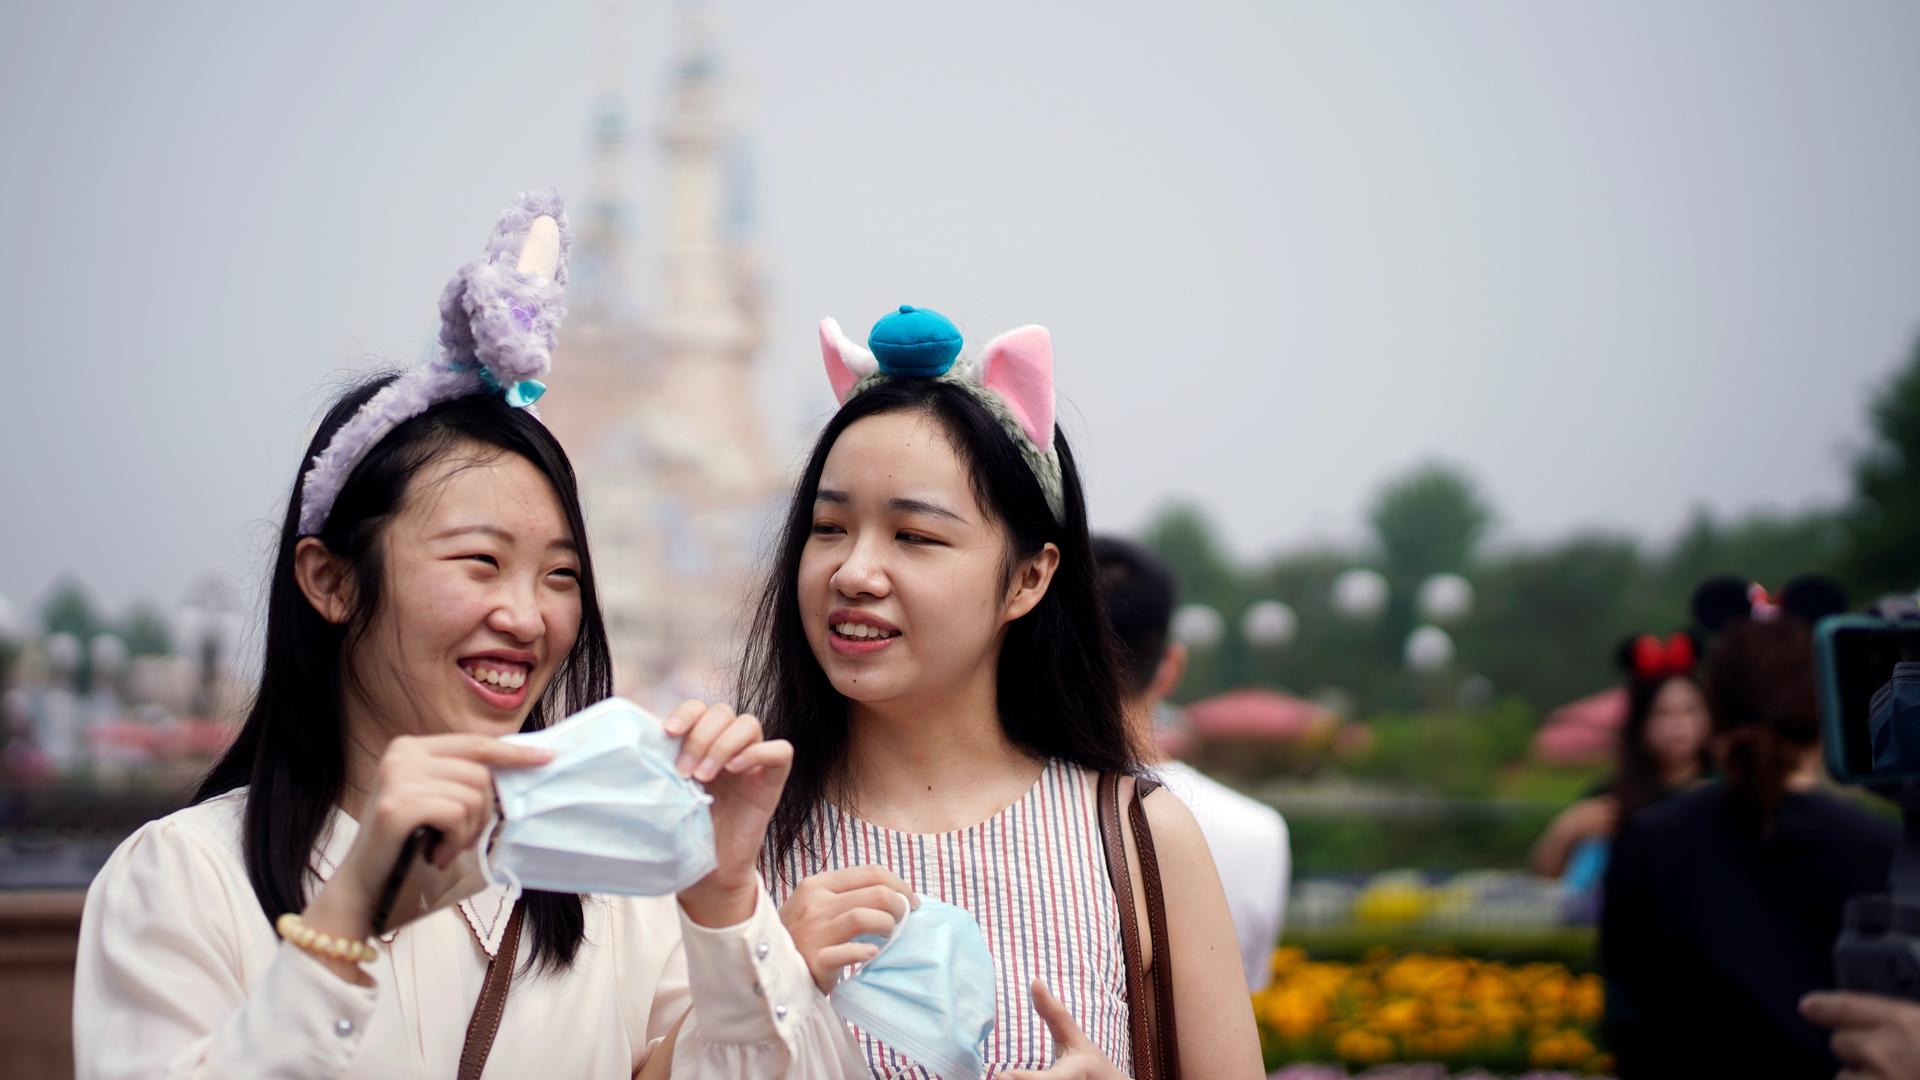 Two young women with headbands hold face masks at the Shanghai Disneyland theme park as it reopens following a shutdown due to the coronavirus disease